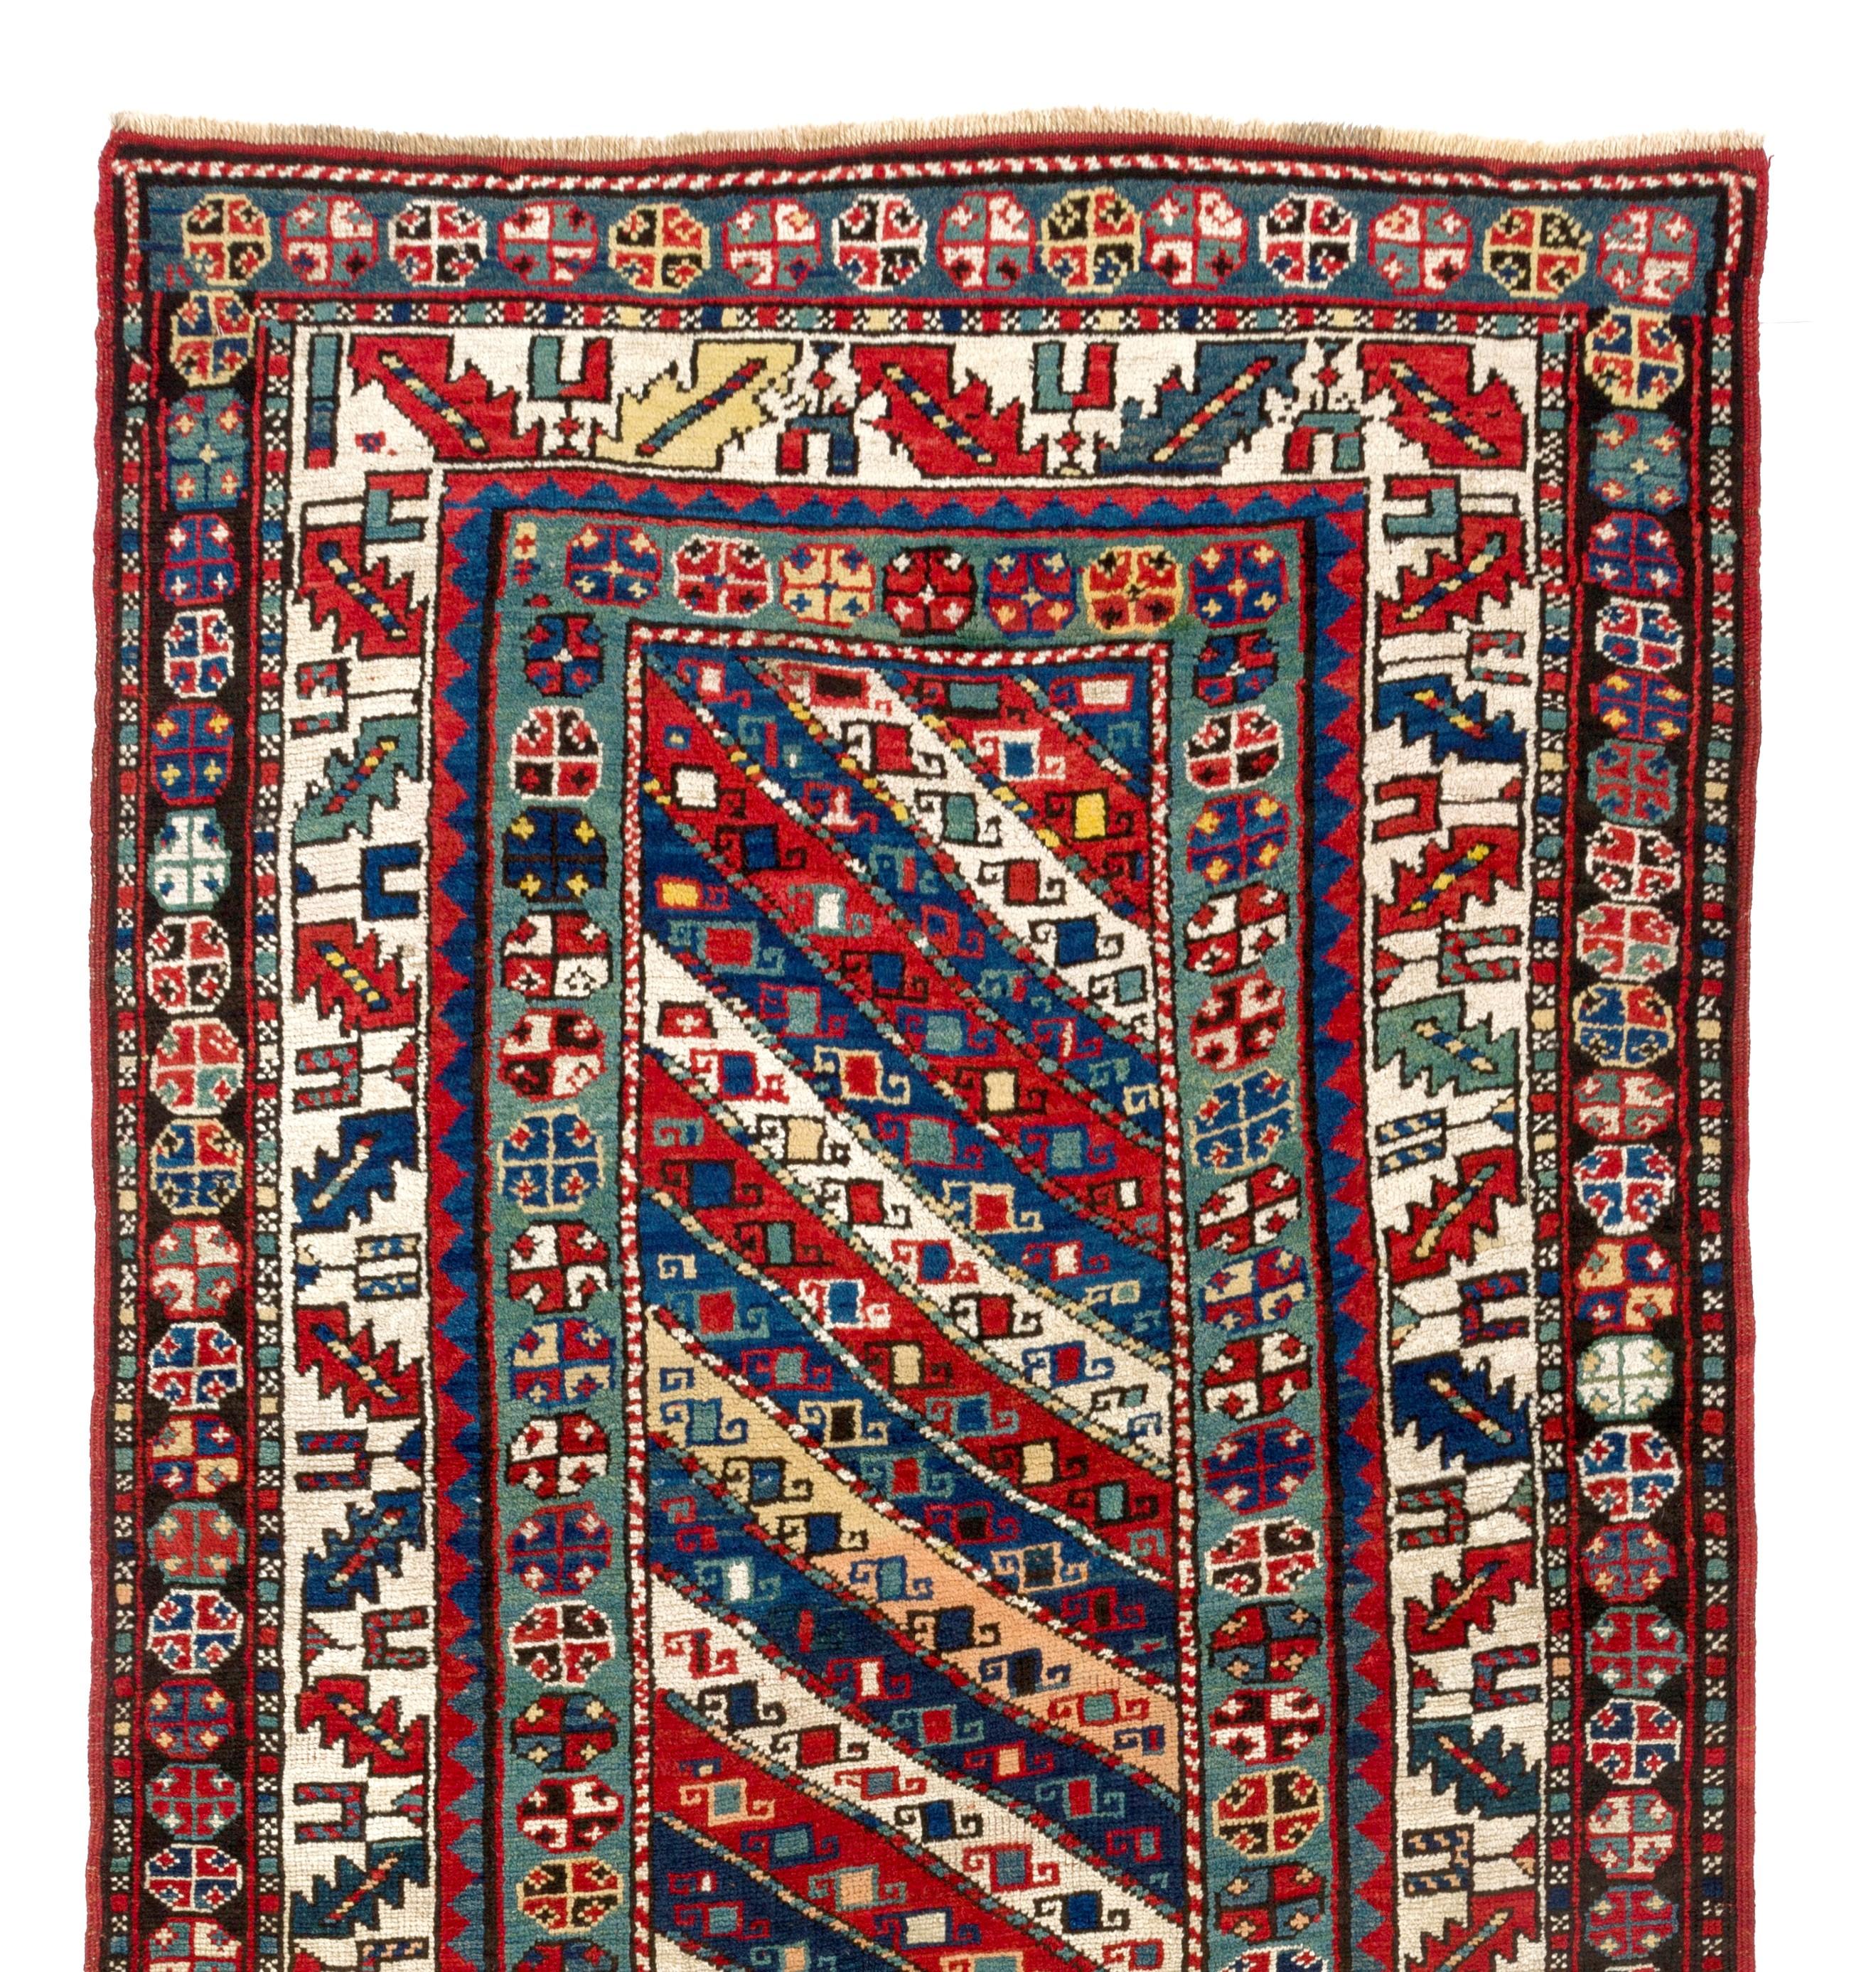 Antique Caucasian Gendje Kazak rug with beautiful natural dyes. Finely hand-knotted with even medium wool pile on wool foundation. Very good condition. Sturdy and as clean as a brand new rug (deep washed professionally). Measures: 3.7 x 7.2 ft.